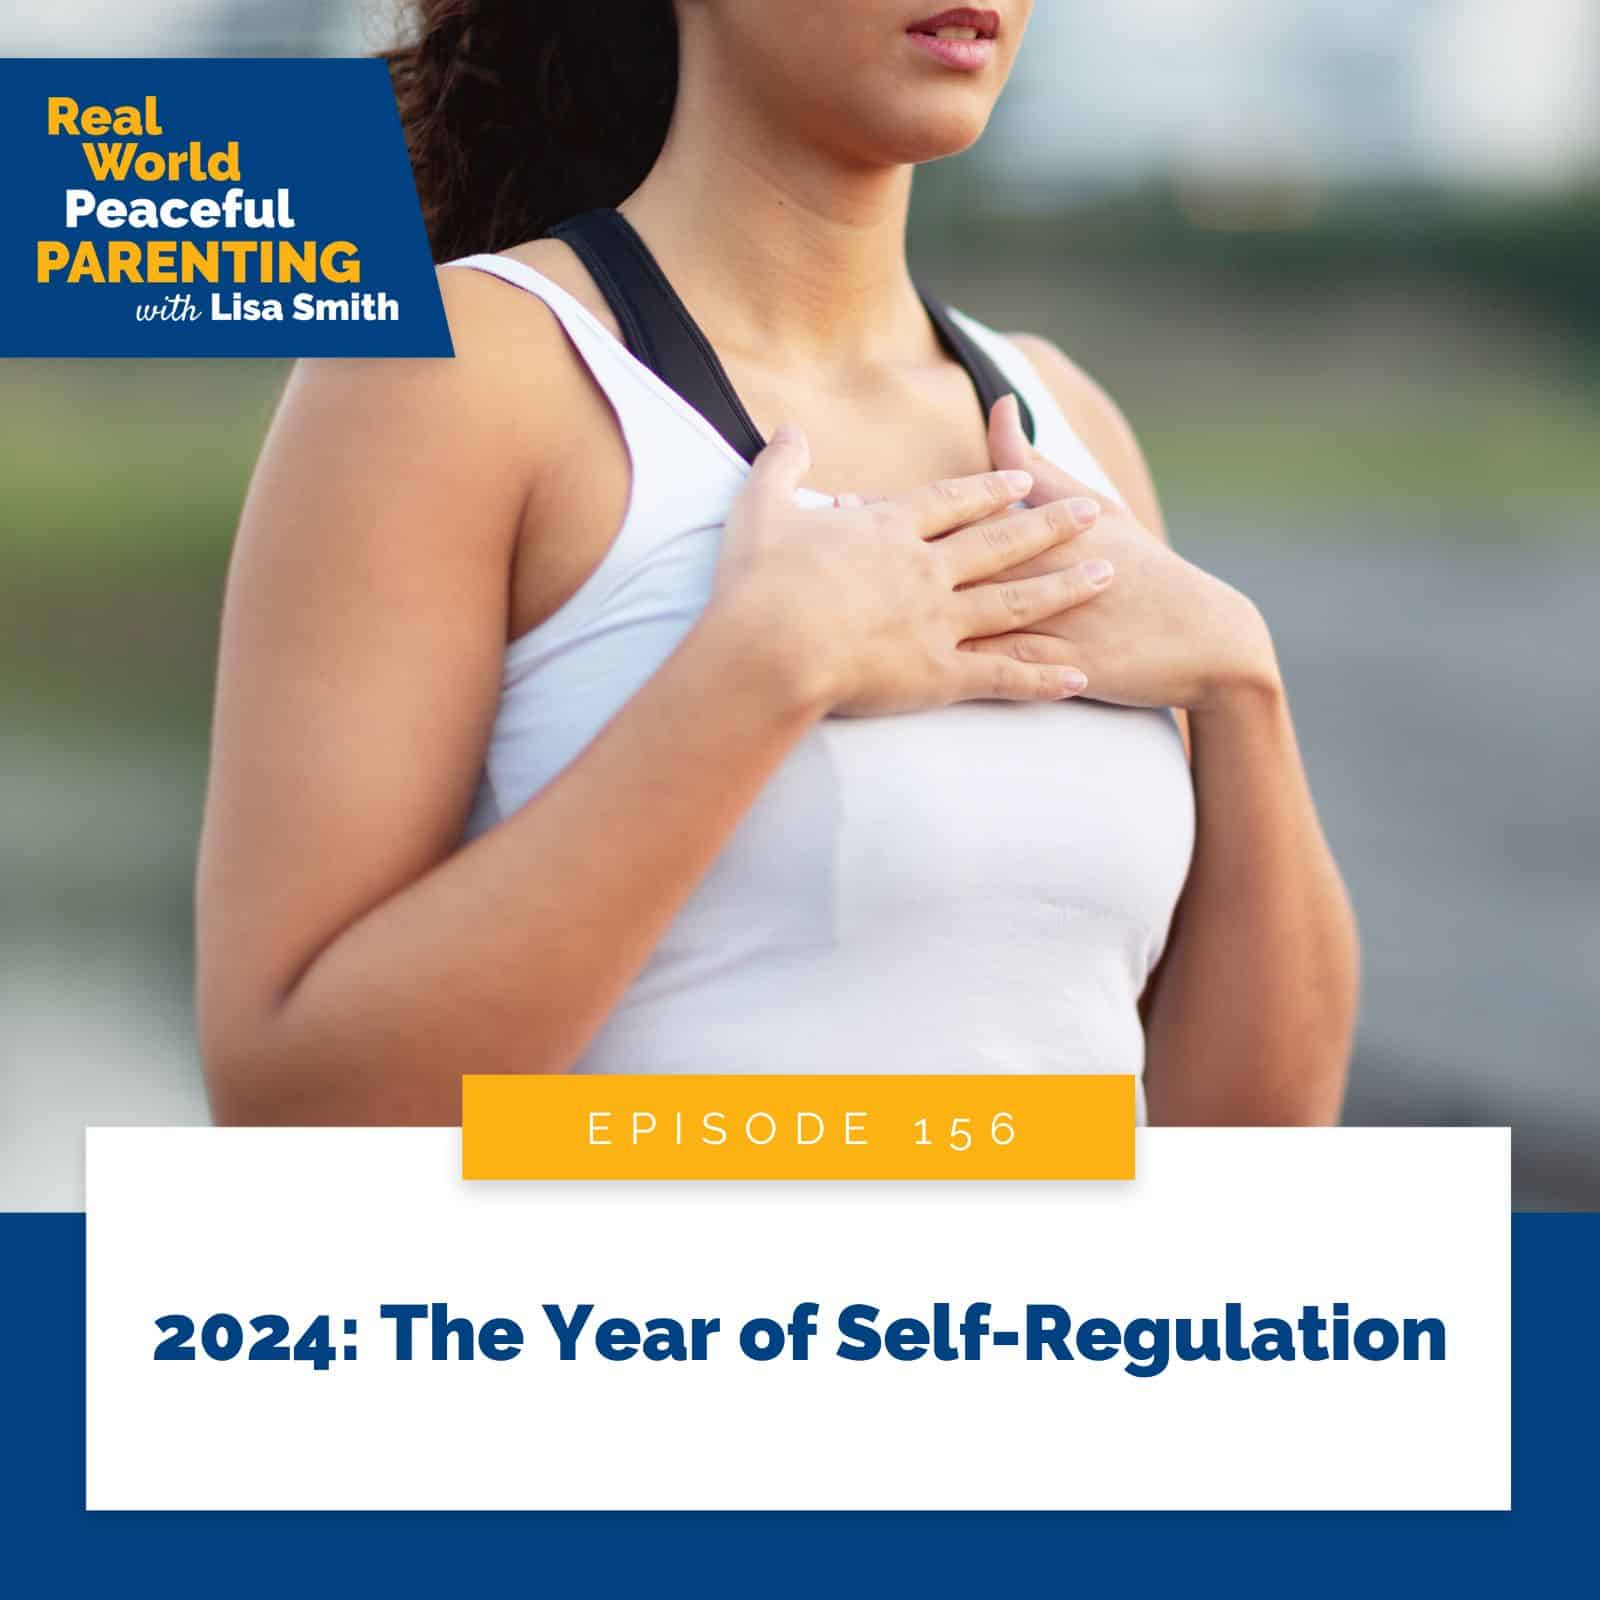 Real World Peaceful Parenting with Lisa Smith | 2024: The Year of Self-Regulation